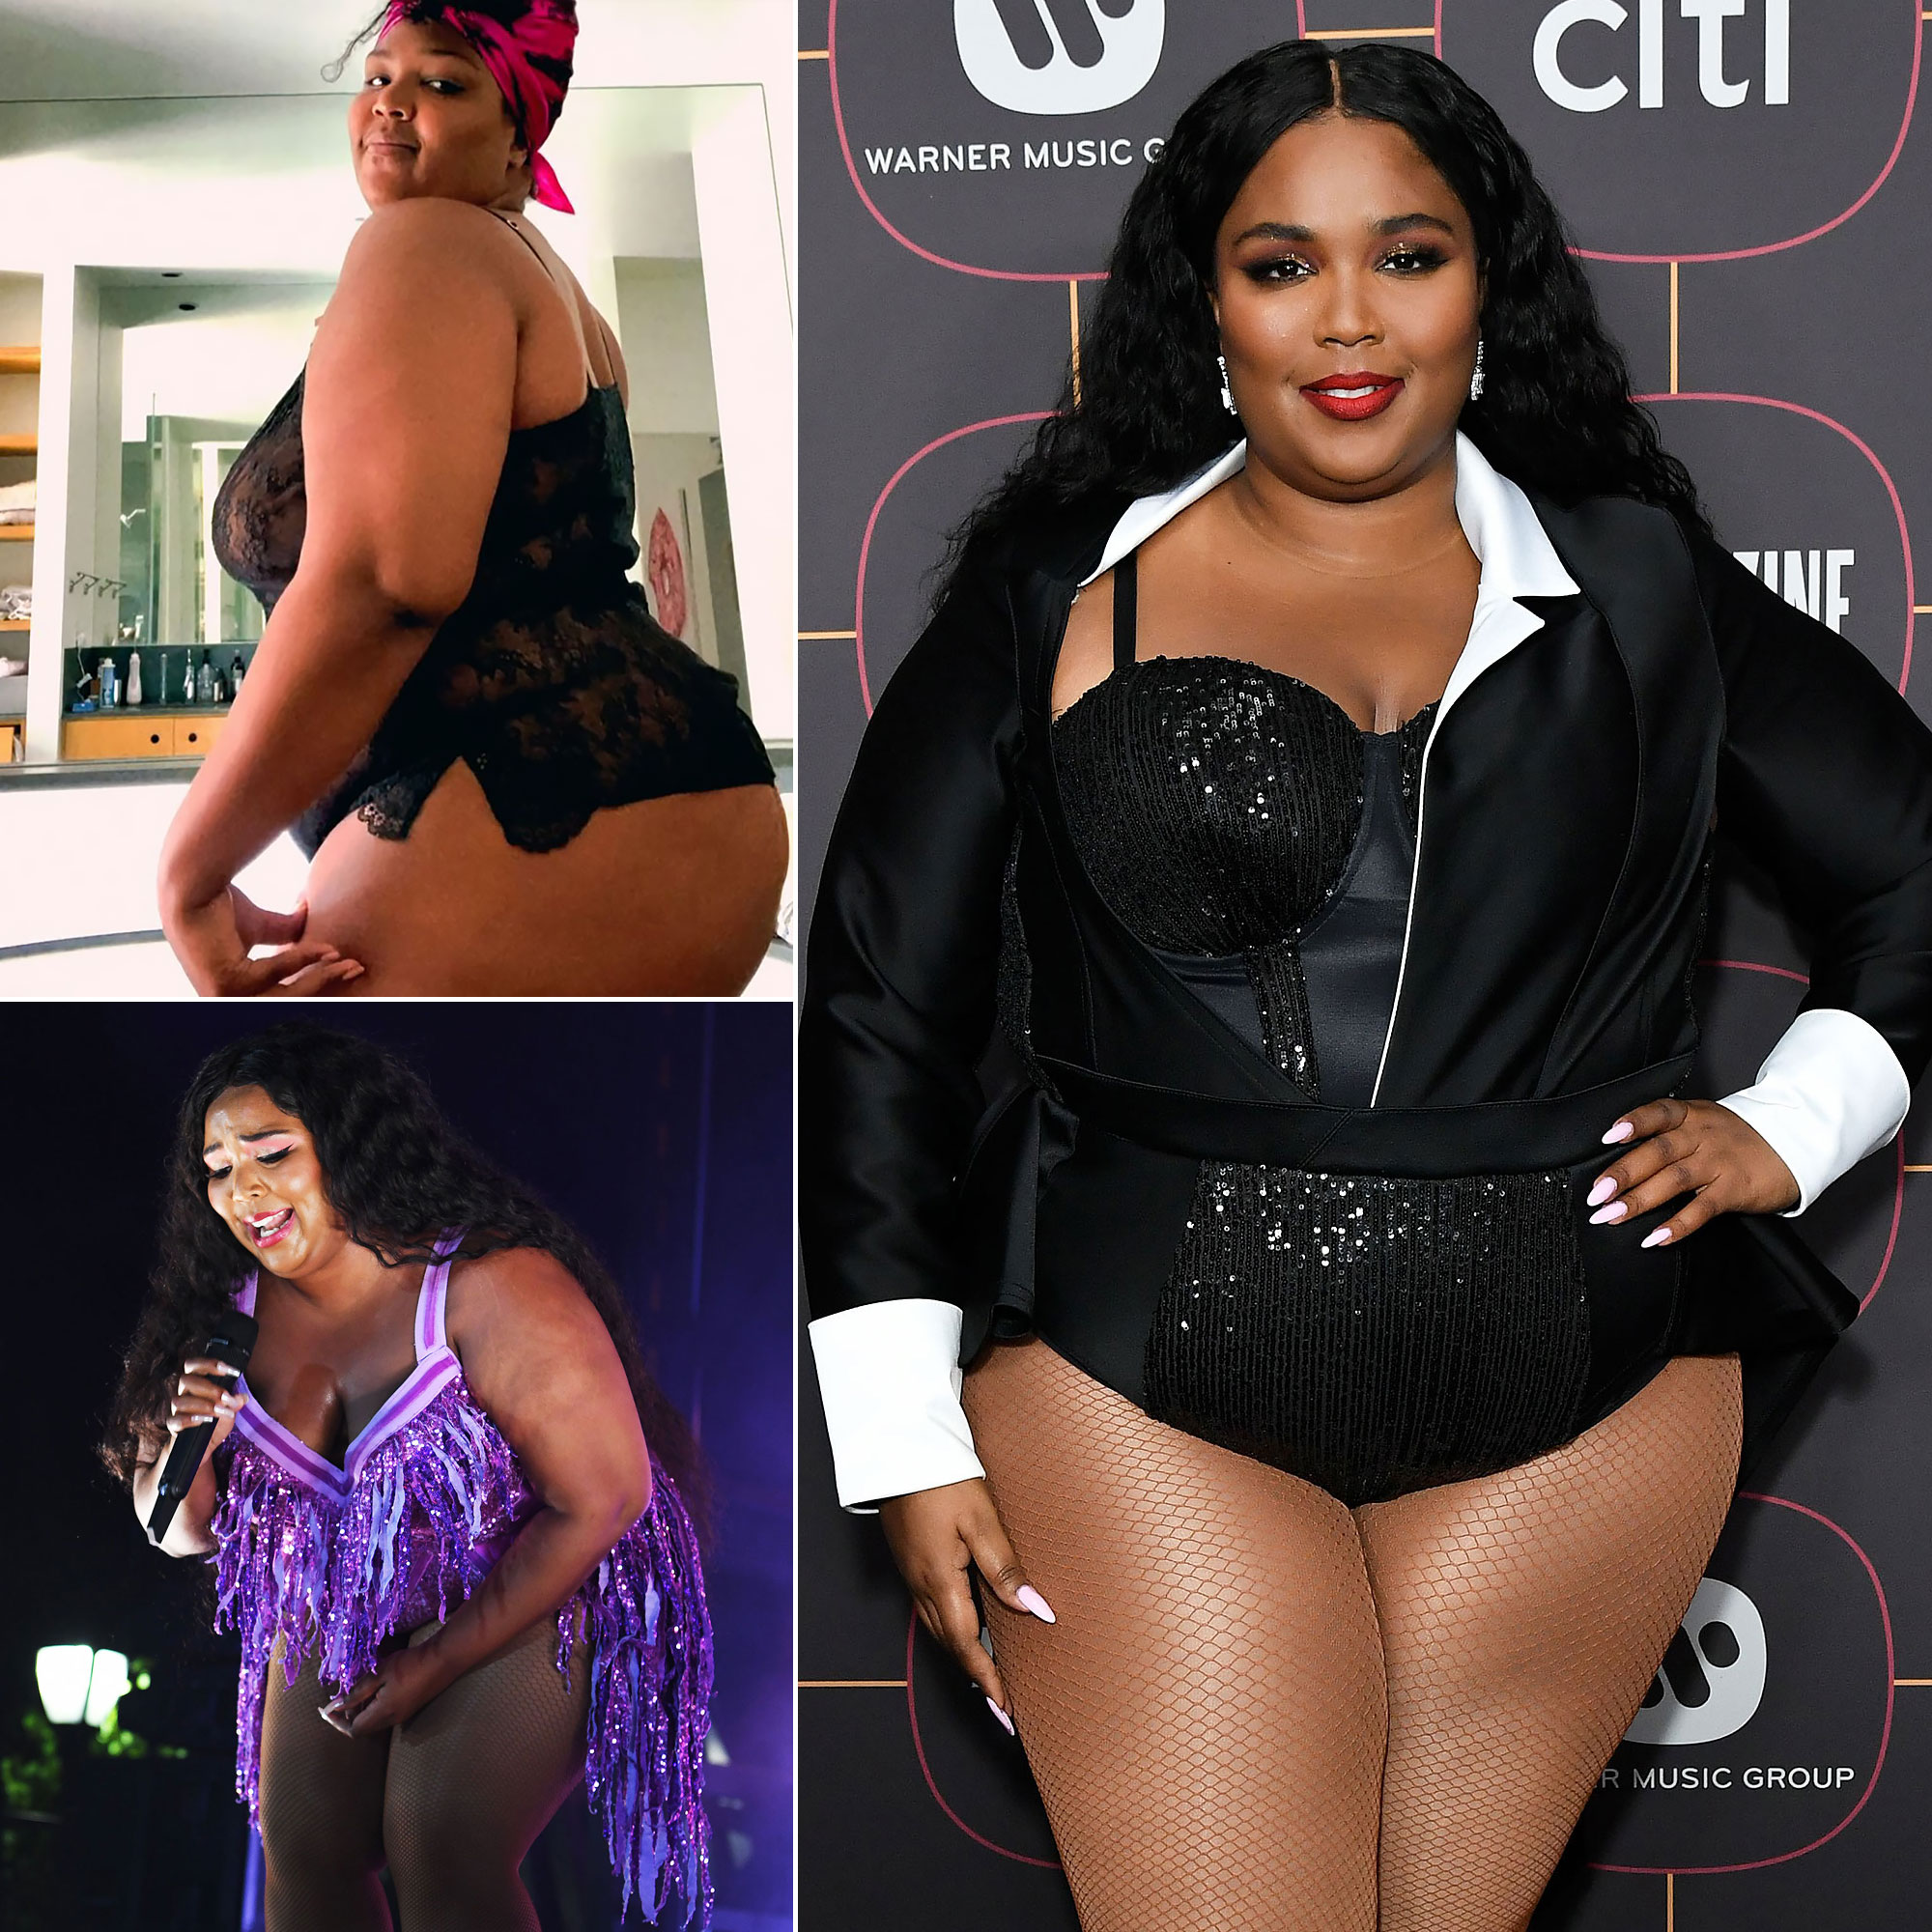 Lizzo dons a sparkly pink bodysuit as she storms the stage during her  Special Tour in Detroit